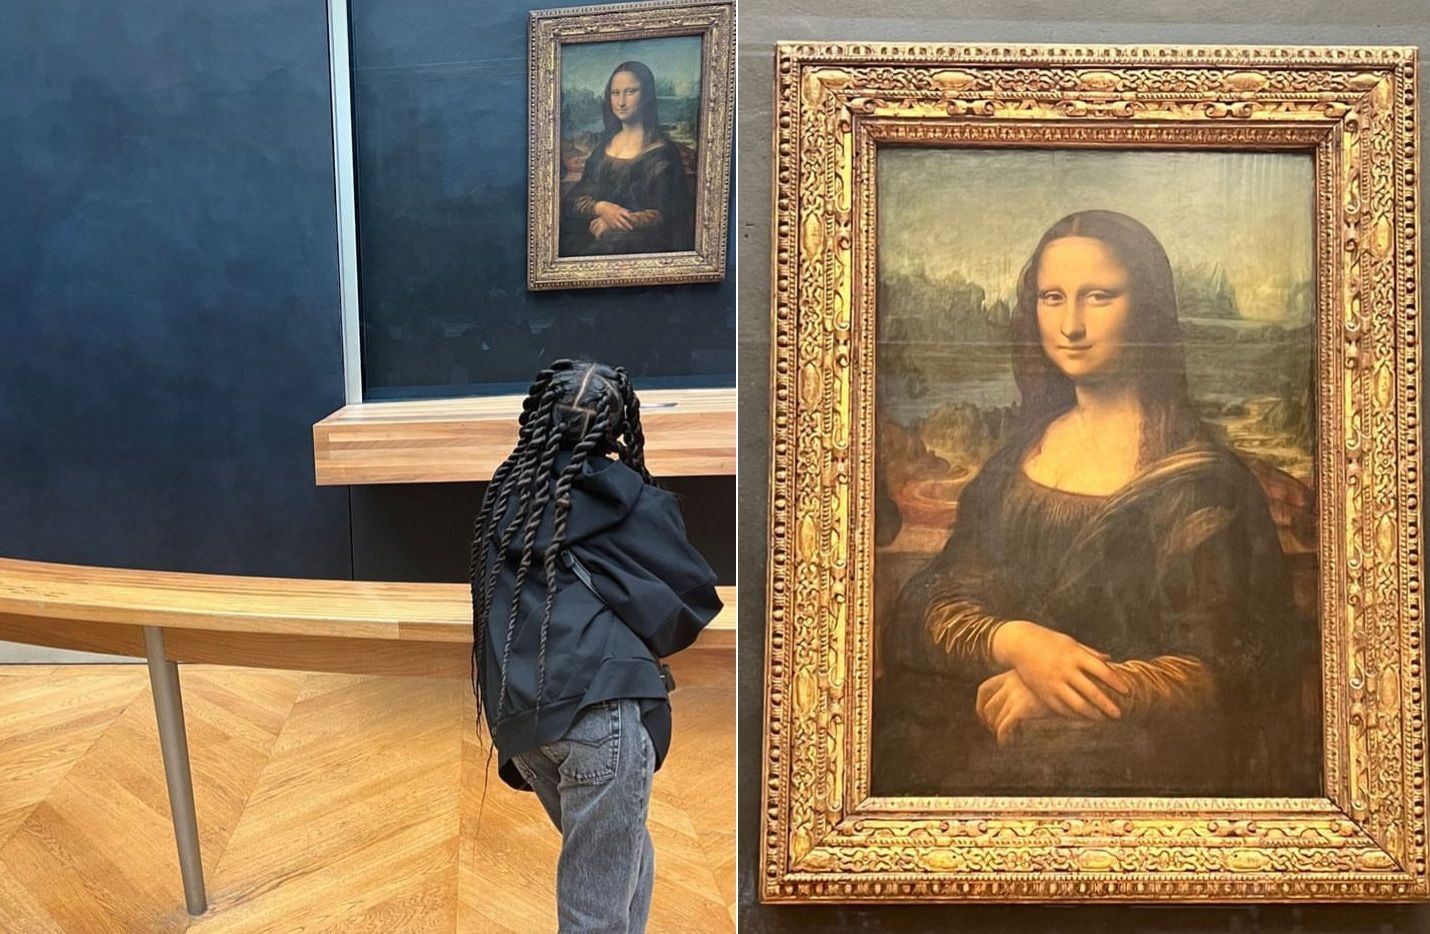 How much does it cost to take a private tour of the Louvre like Kim Kardashian